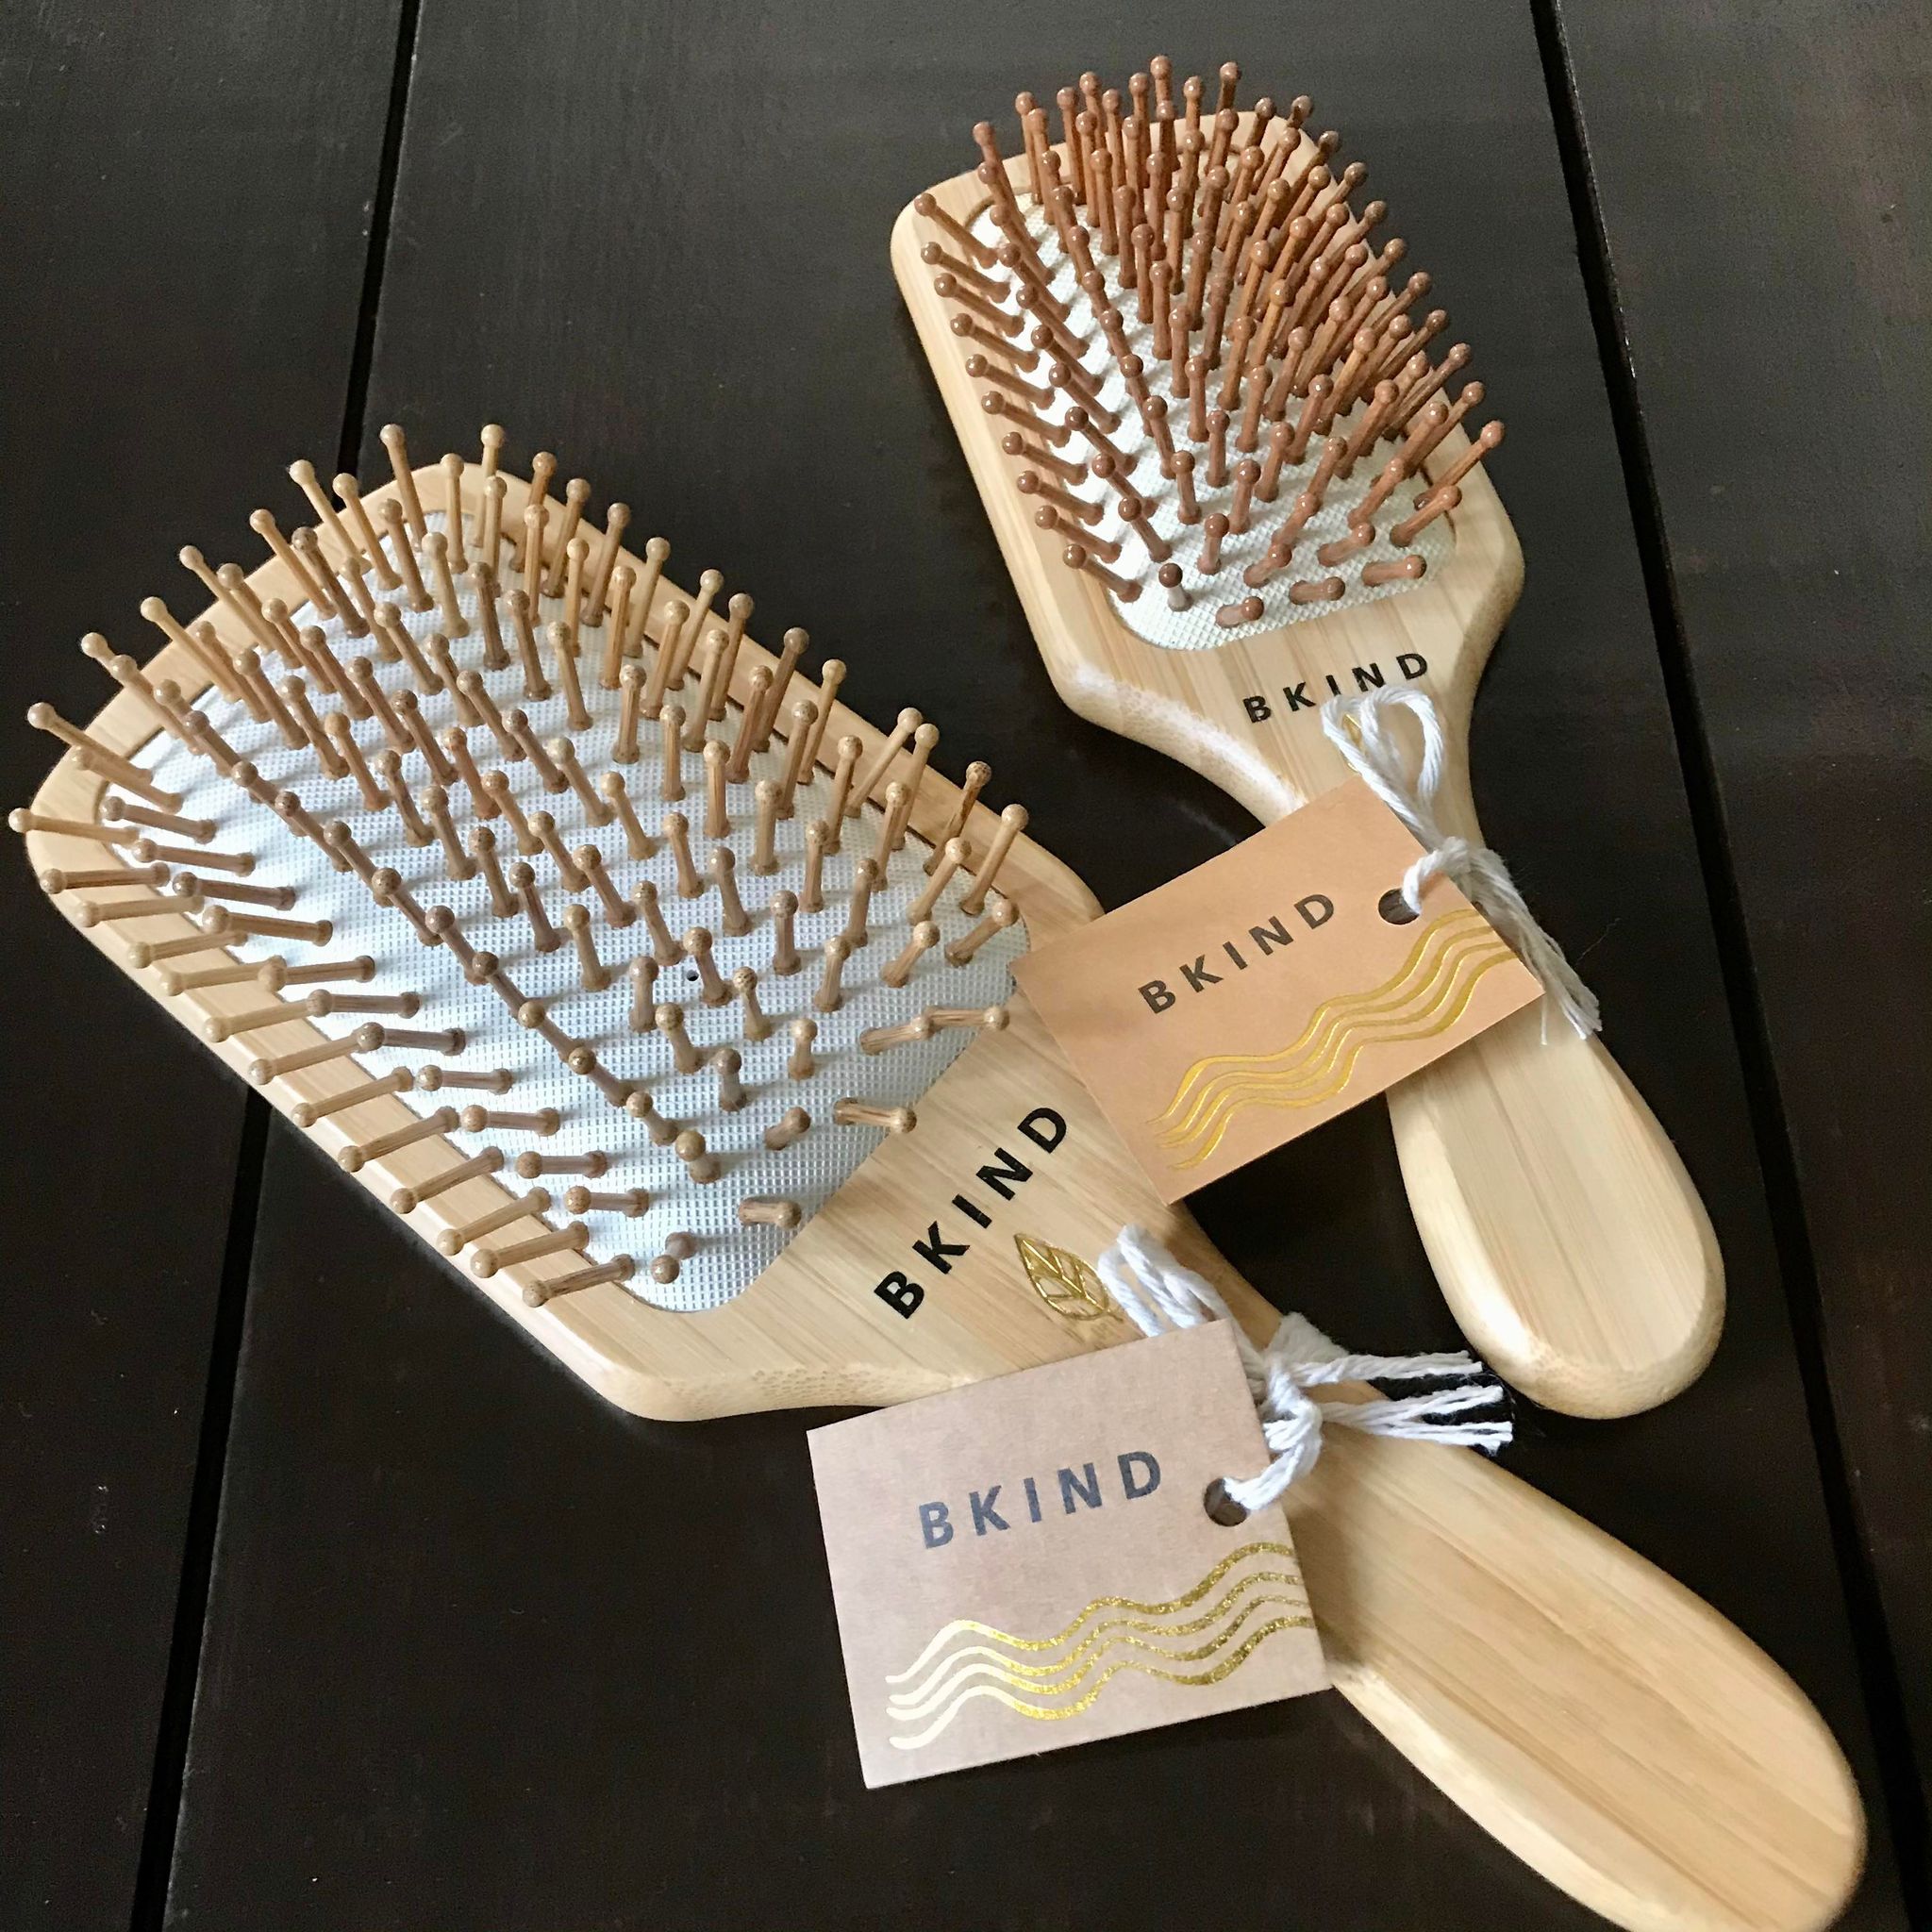 Looking for an environmentally friendly hairbrush made of wood, with no animal hair? If so, one of these bamboo hairbrushes from BKIND may be just what you are looking for.